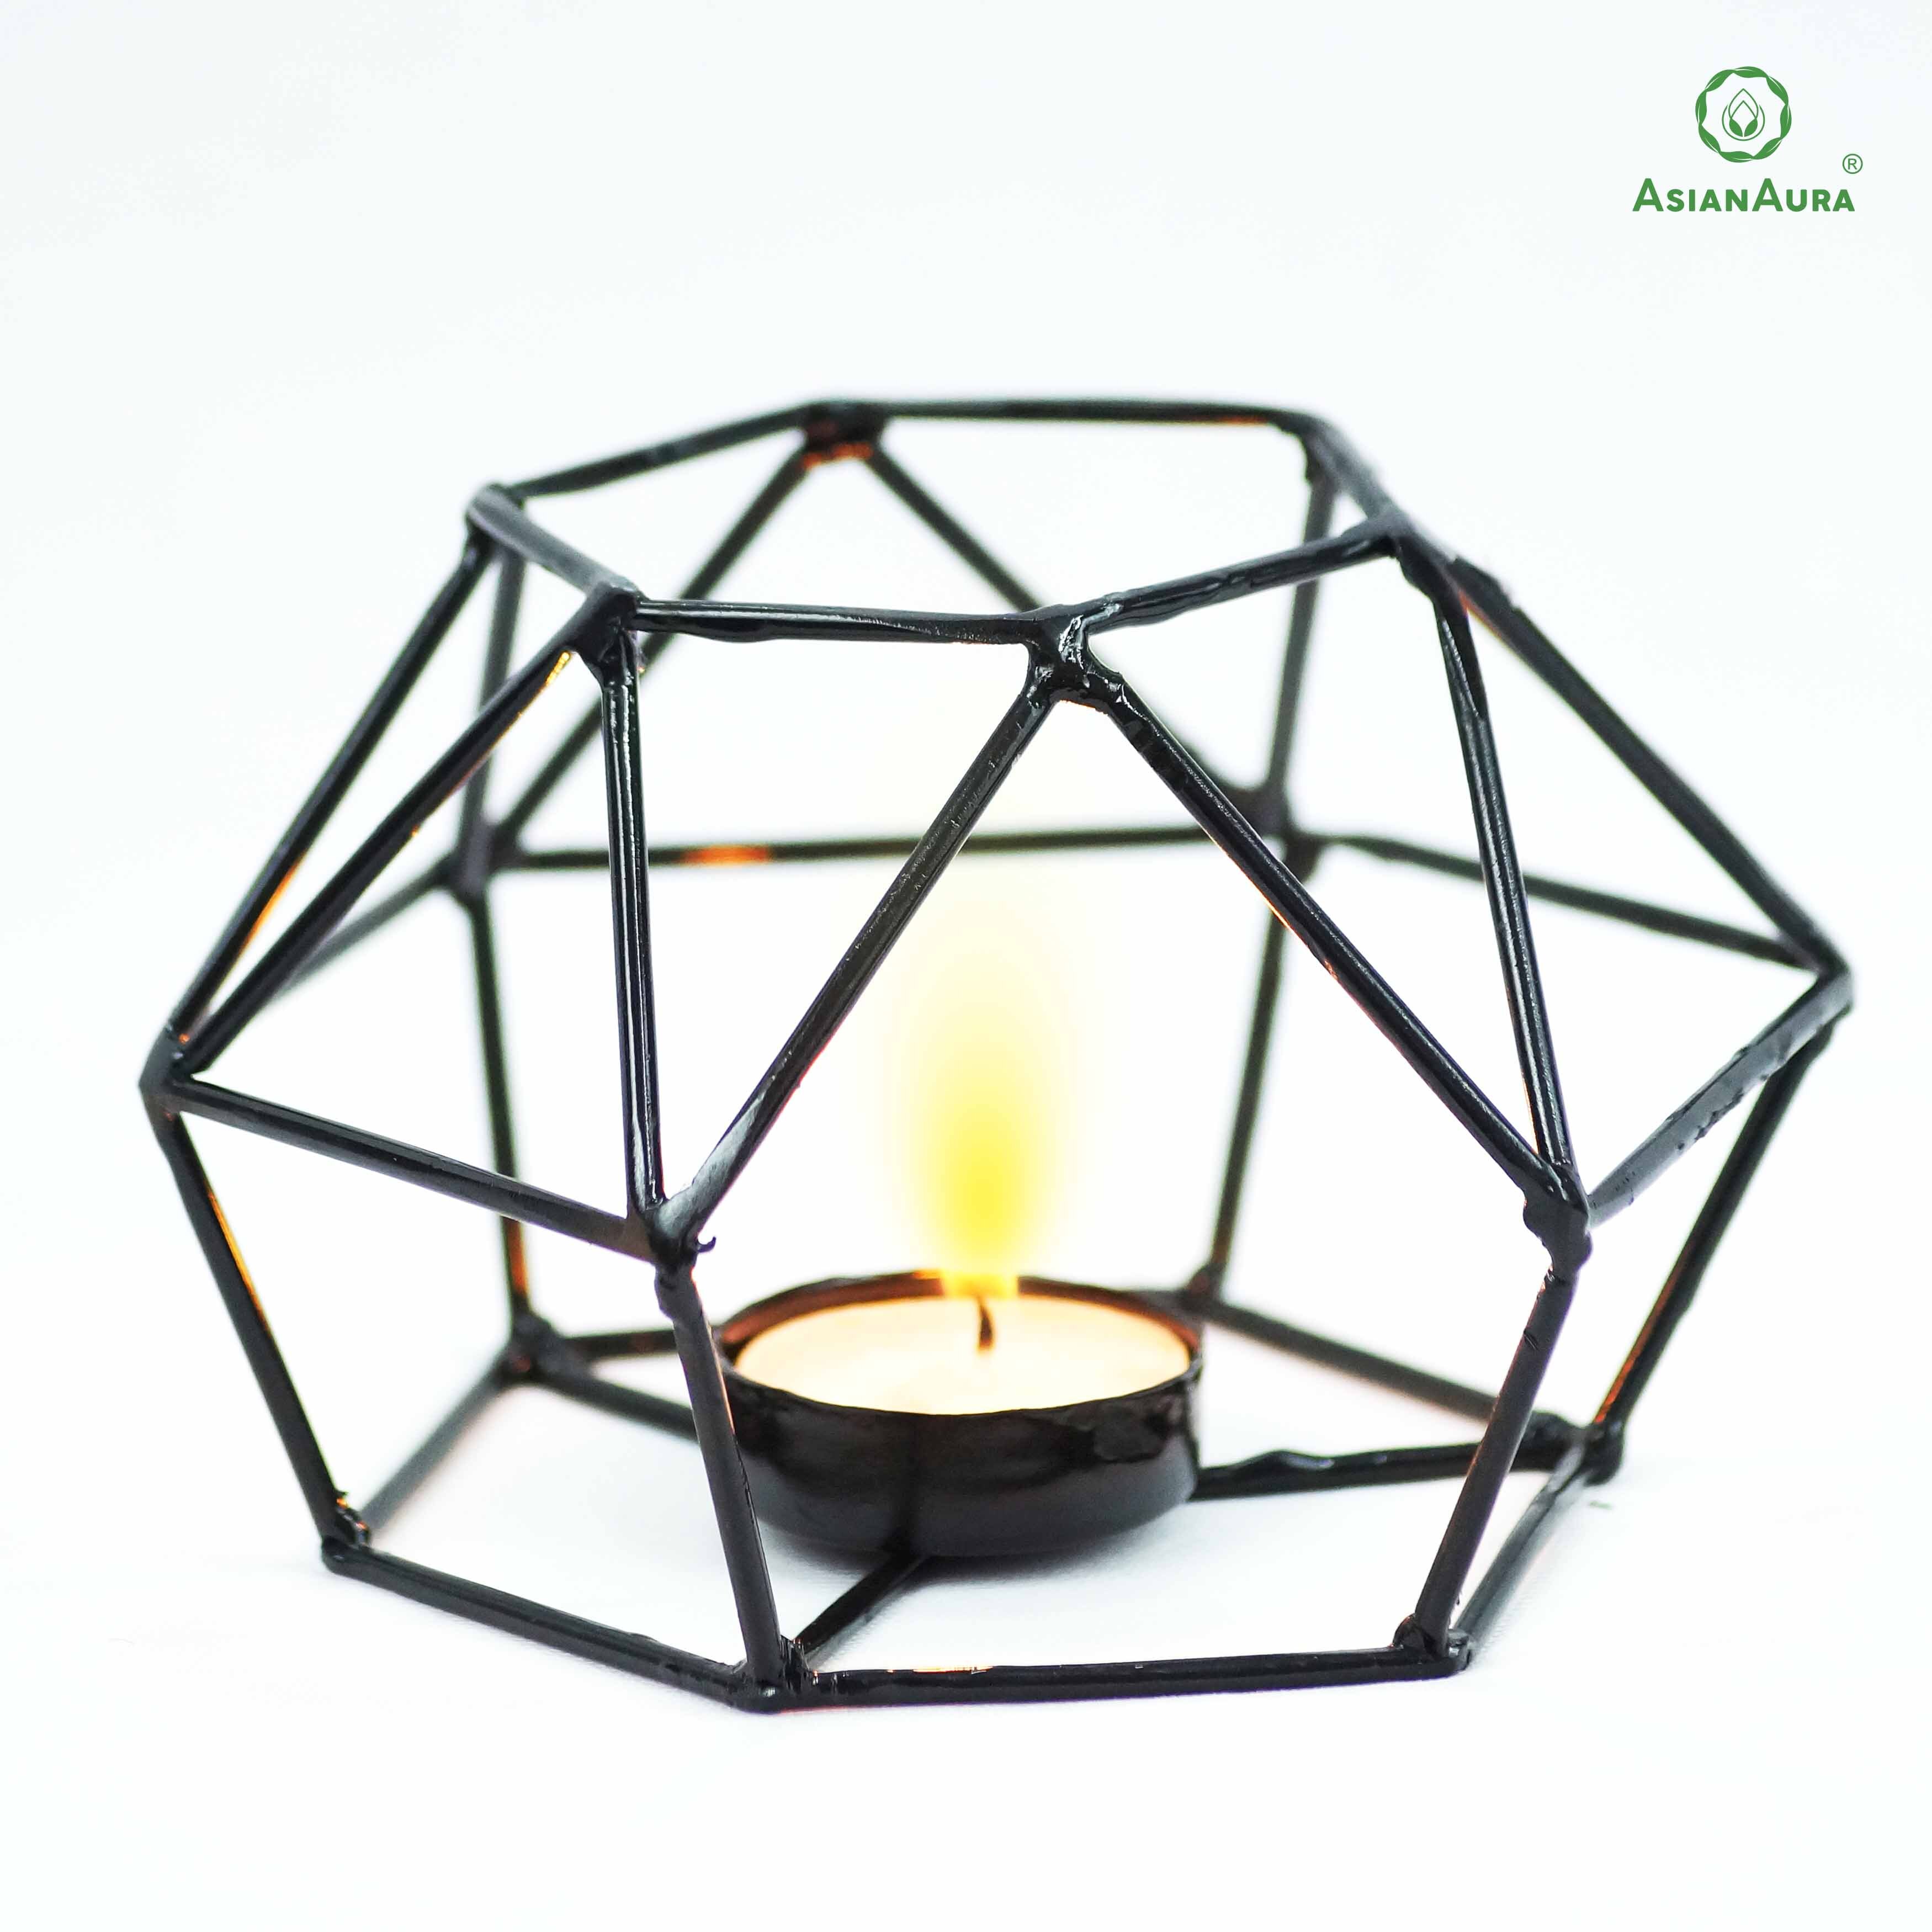 Candle Holder for Birthday Diwali Decoration for Home Room Bedroom and Bathroom Iron Glass Candle Holder ASMETL027